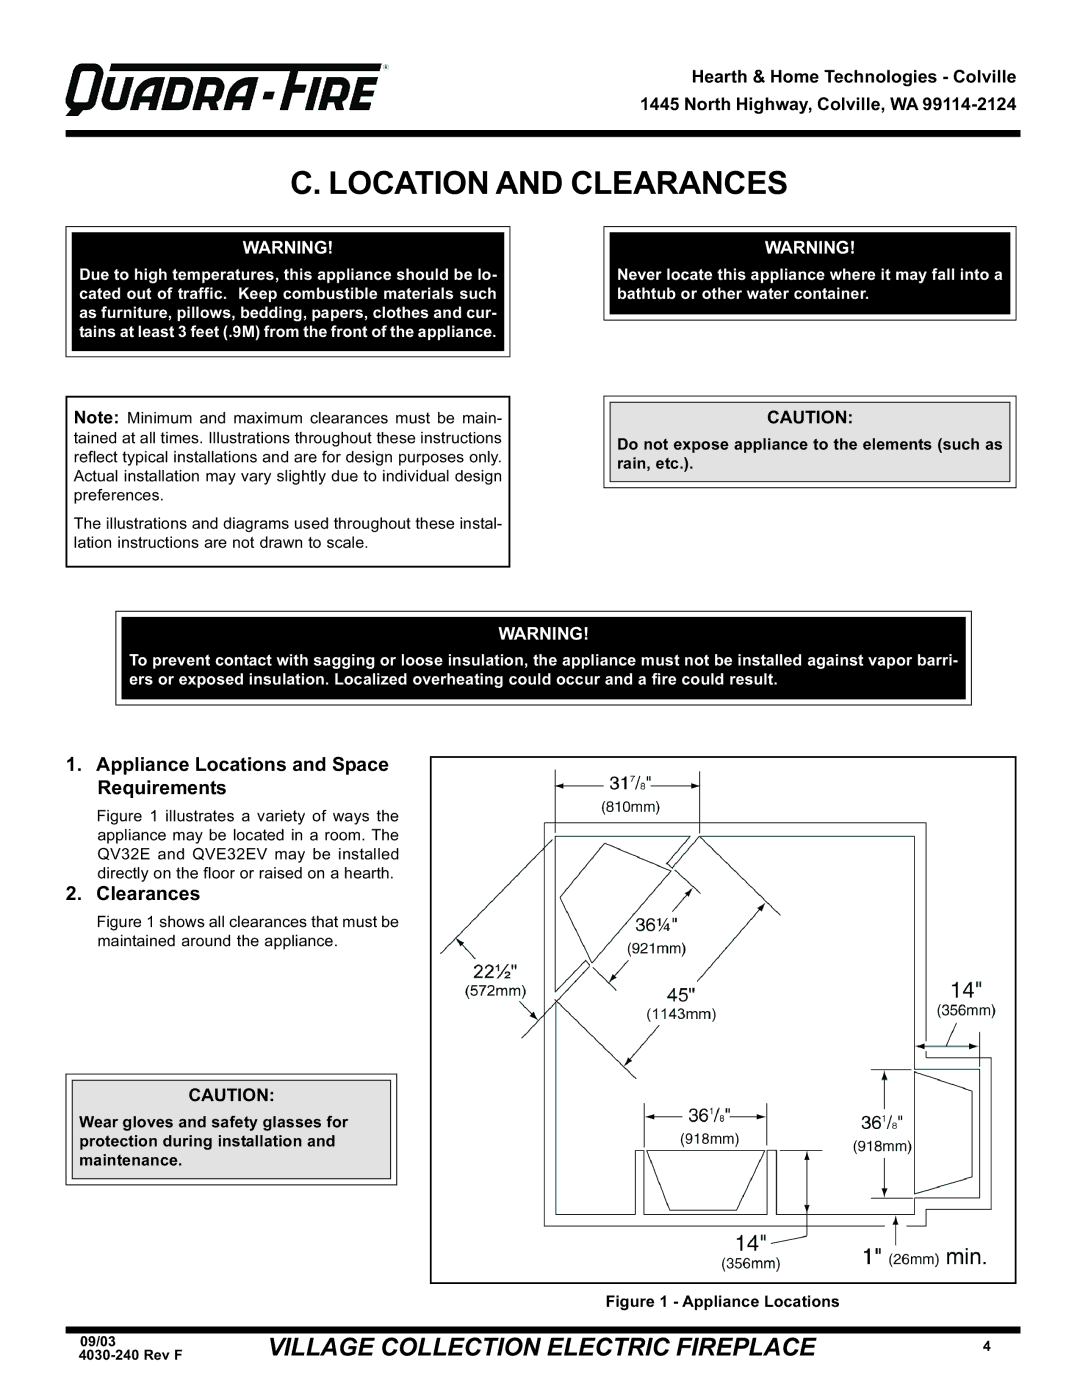 Hearth and Home Technologies QV32EV, QV32E warranty Location and Clearances, Appliance Locations and Space Requirements 